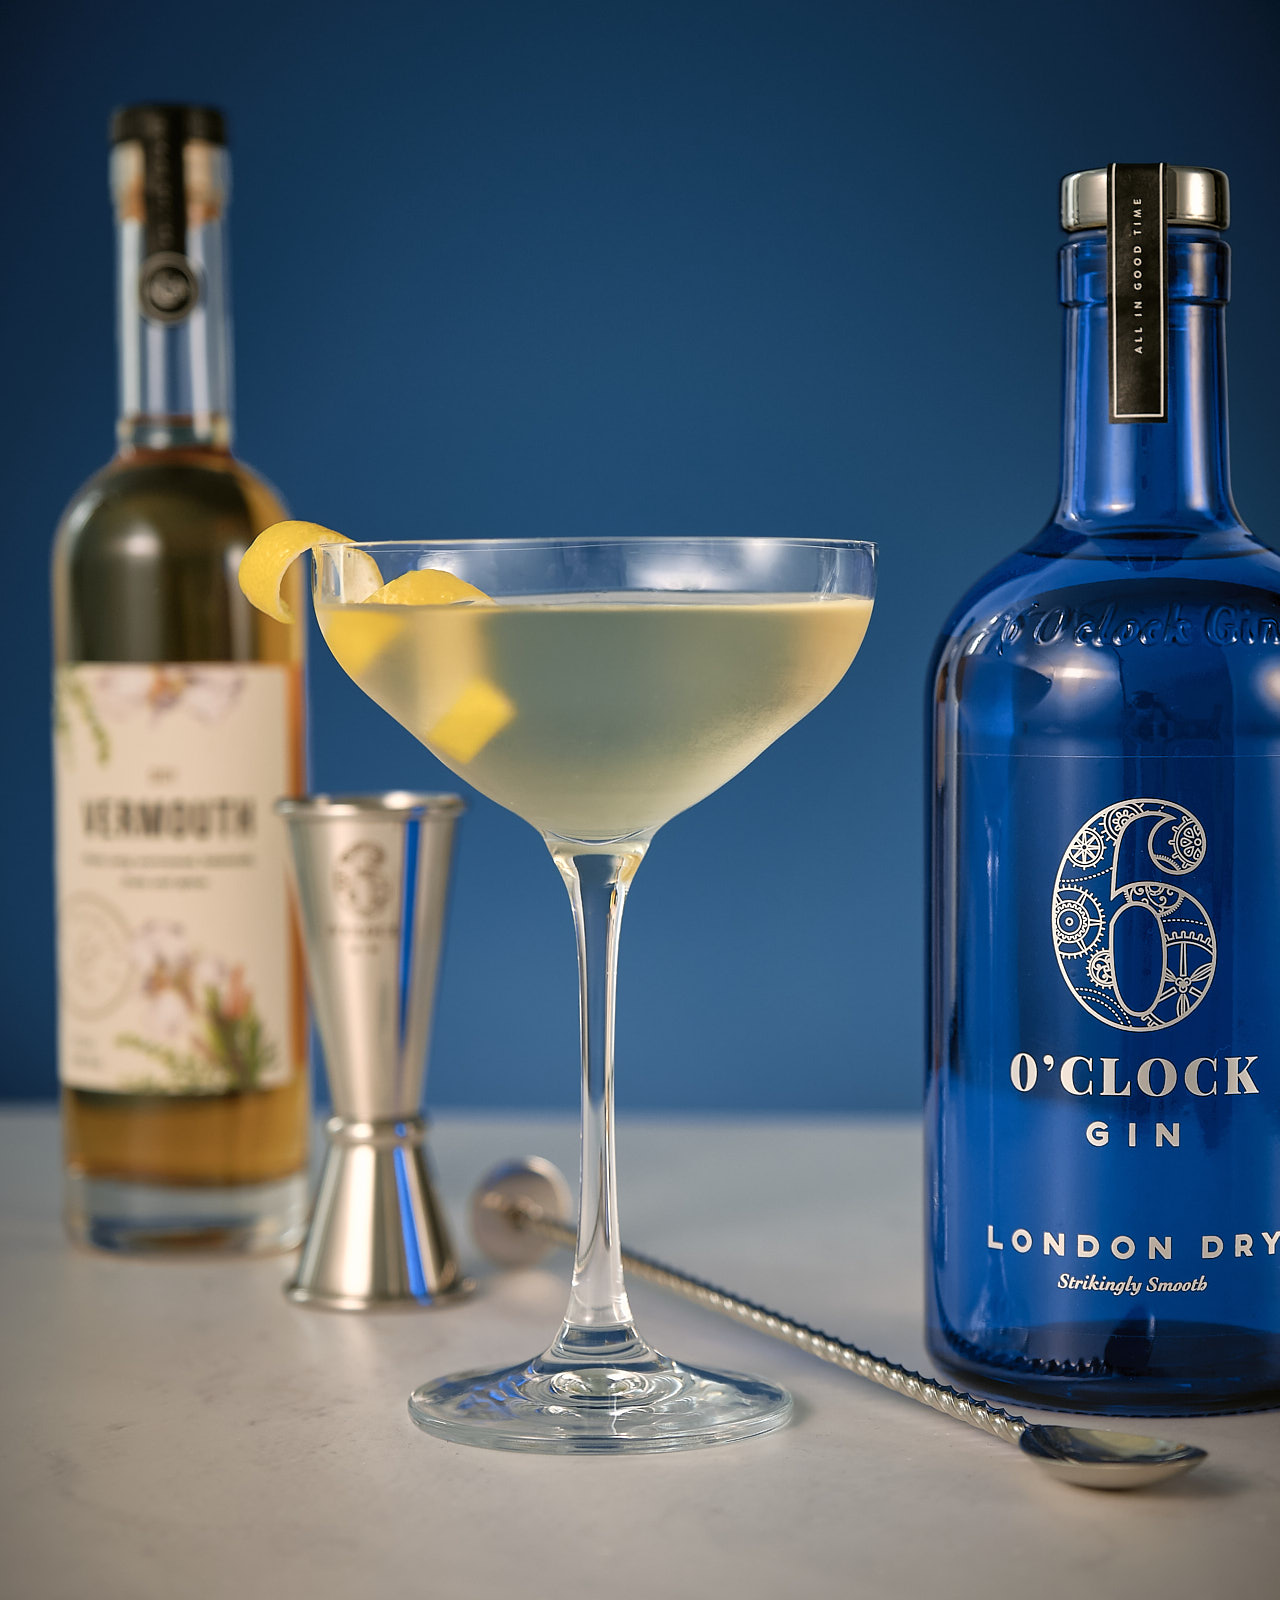 Learn how to make the perfect gin martini.